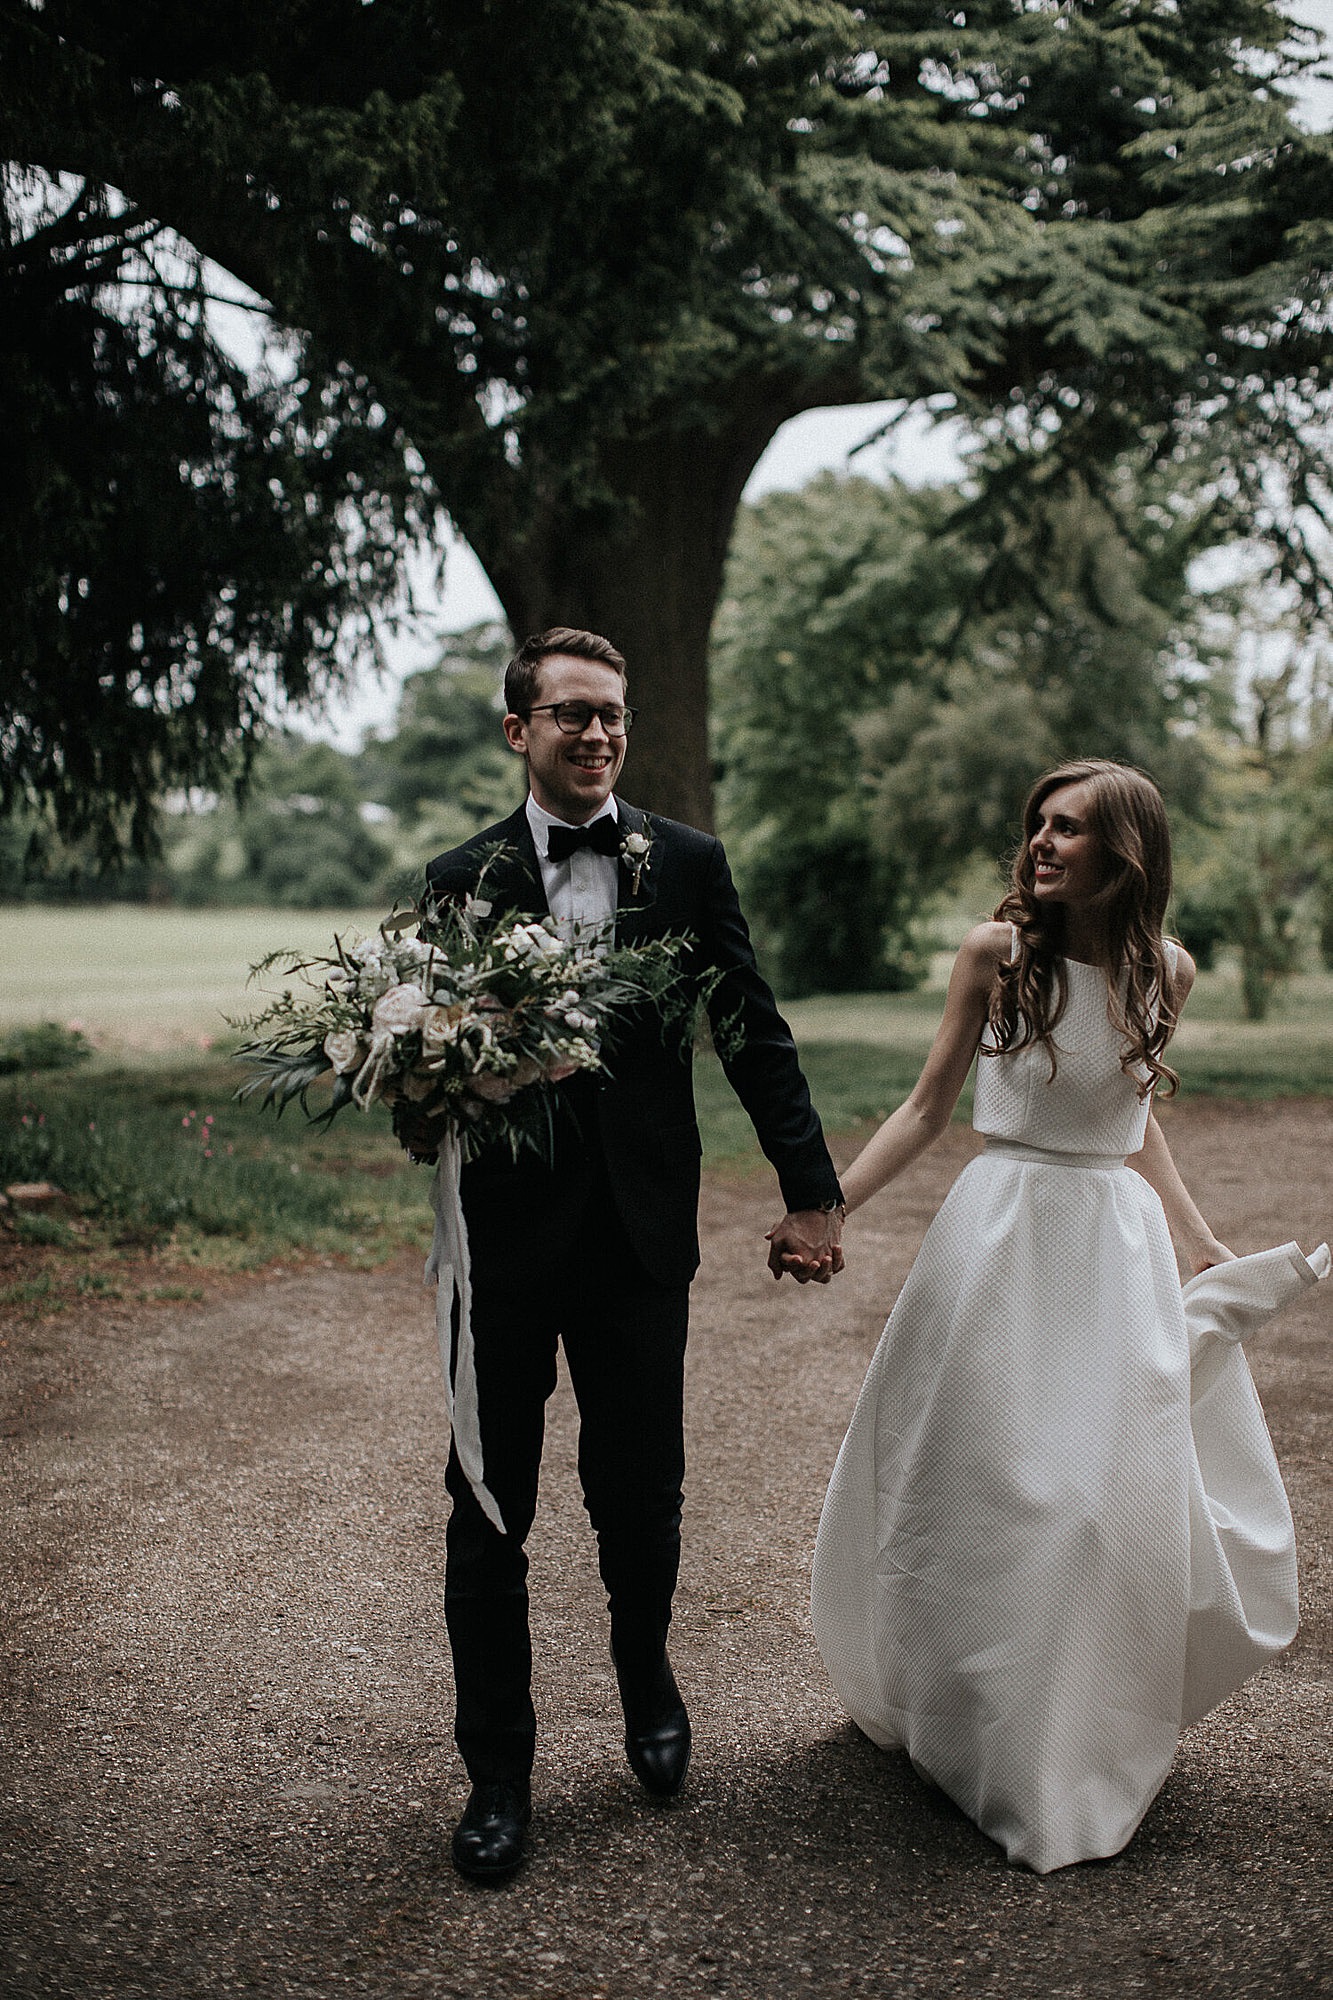 Elegant bride holding hands with groom who is holding a bouquet. Bride wears Jesus Peiro top and skirt.